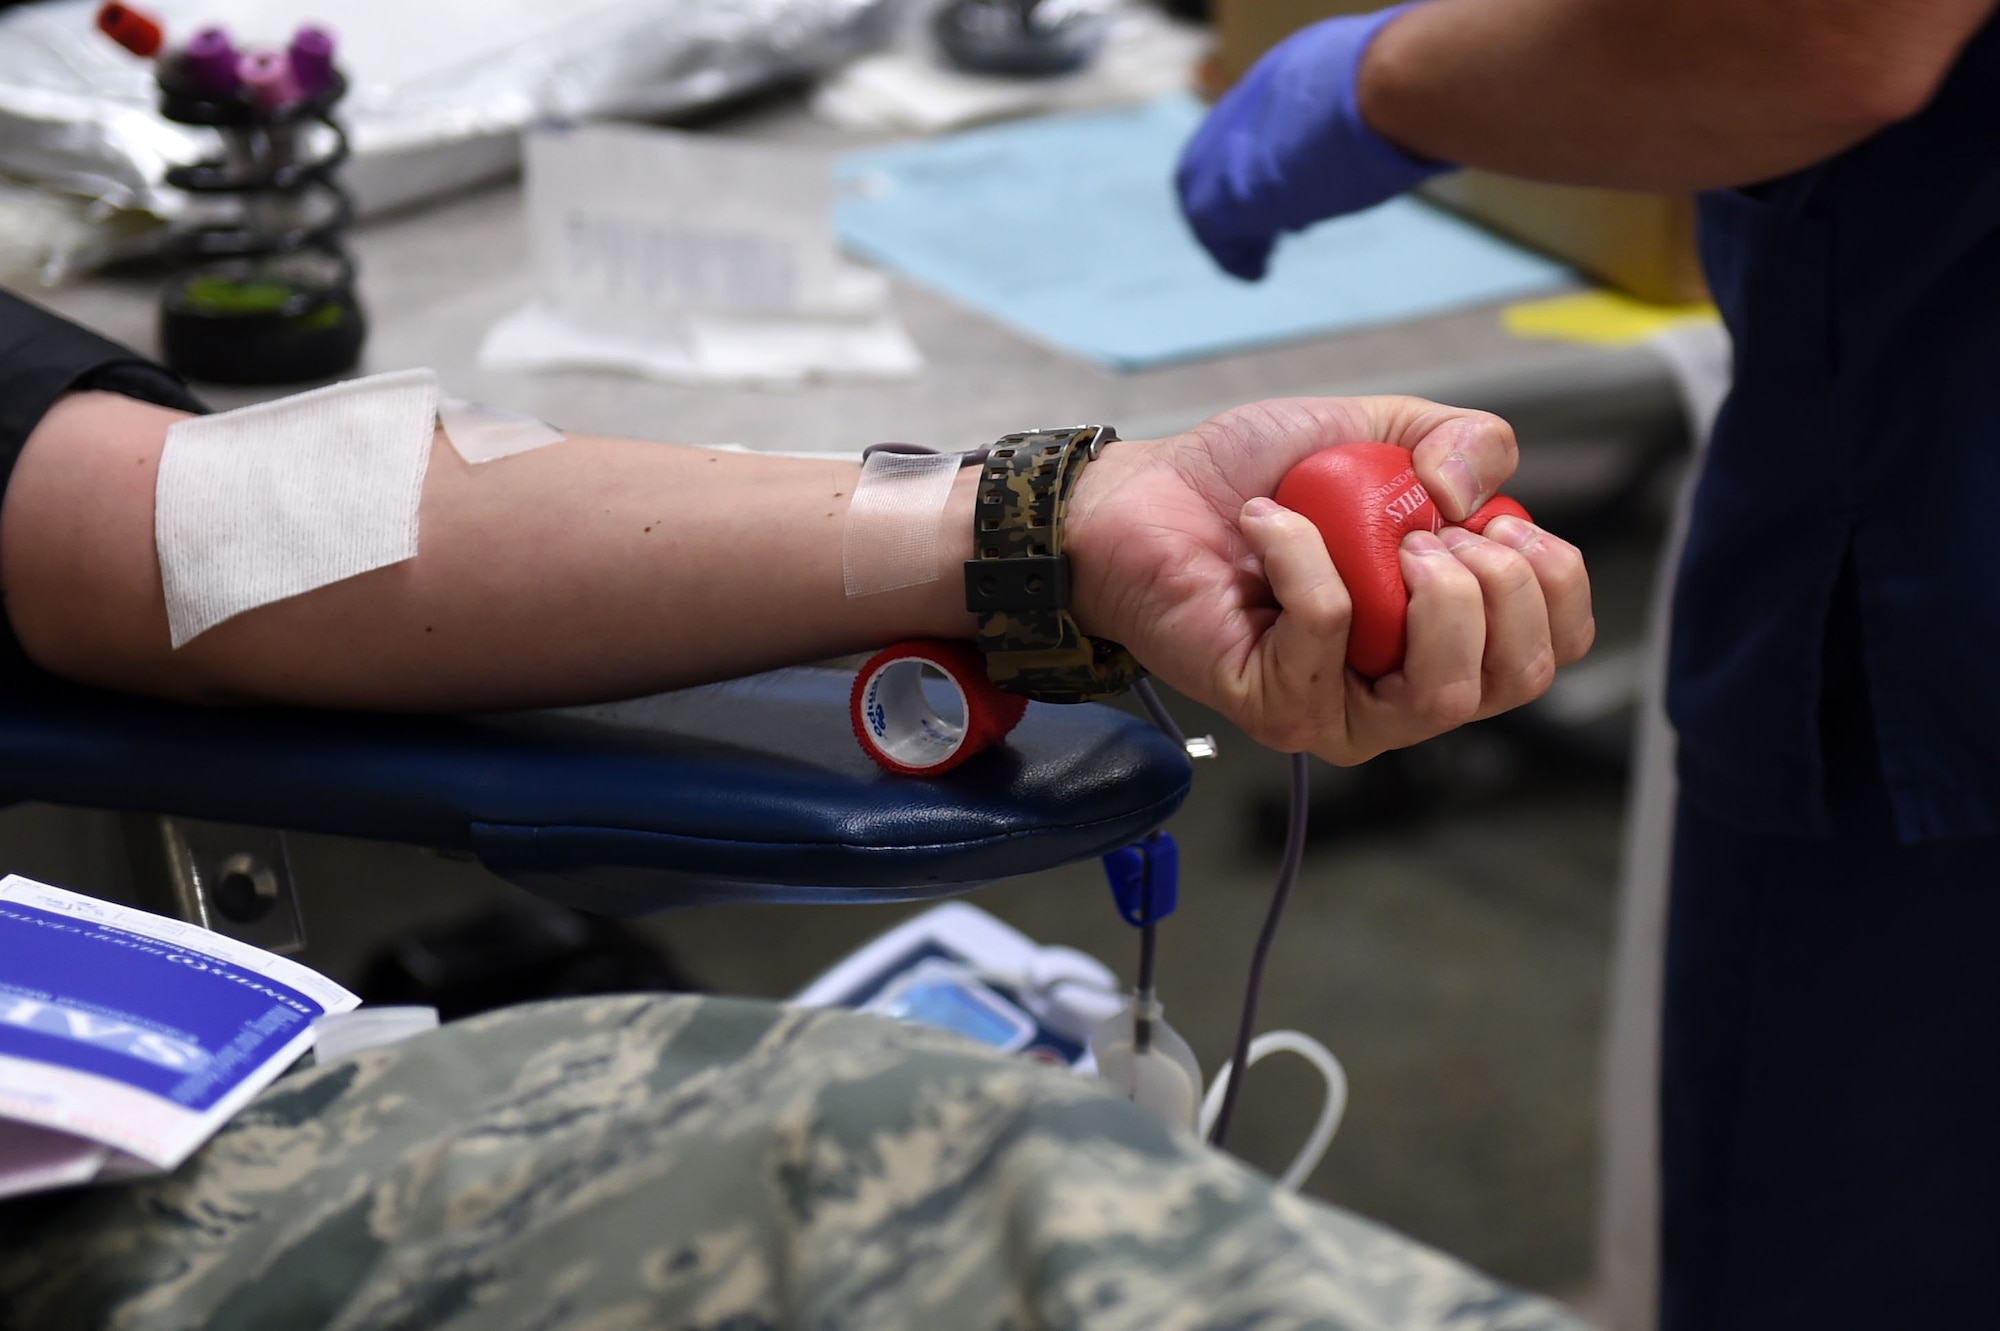 Staff Sgt. Isaac R. Salazar, 460th Space Wing plans manager, gets his blood drawn by Joyce Kissle, Bonfils Blood Bank phlebotomist, during the blood drive June 2, 2015, at the Health and Wellness Center on Buckley Air Force Base, Colo. The blood drive was to support hospitals in the local area. (U.S. Air Force photo by Airman 1st Class Emily E. Amyotte/Released)